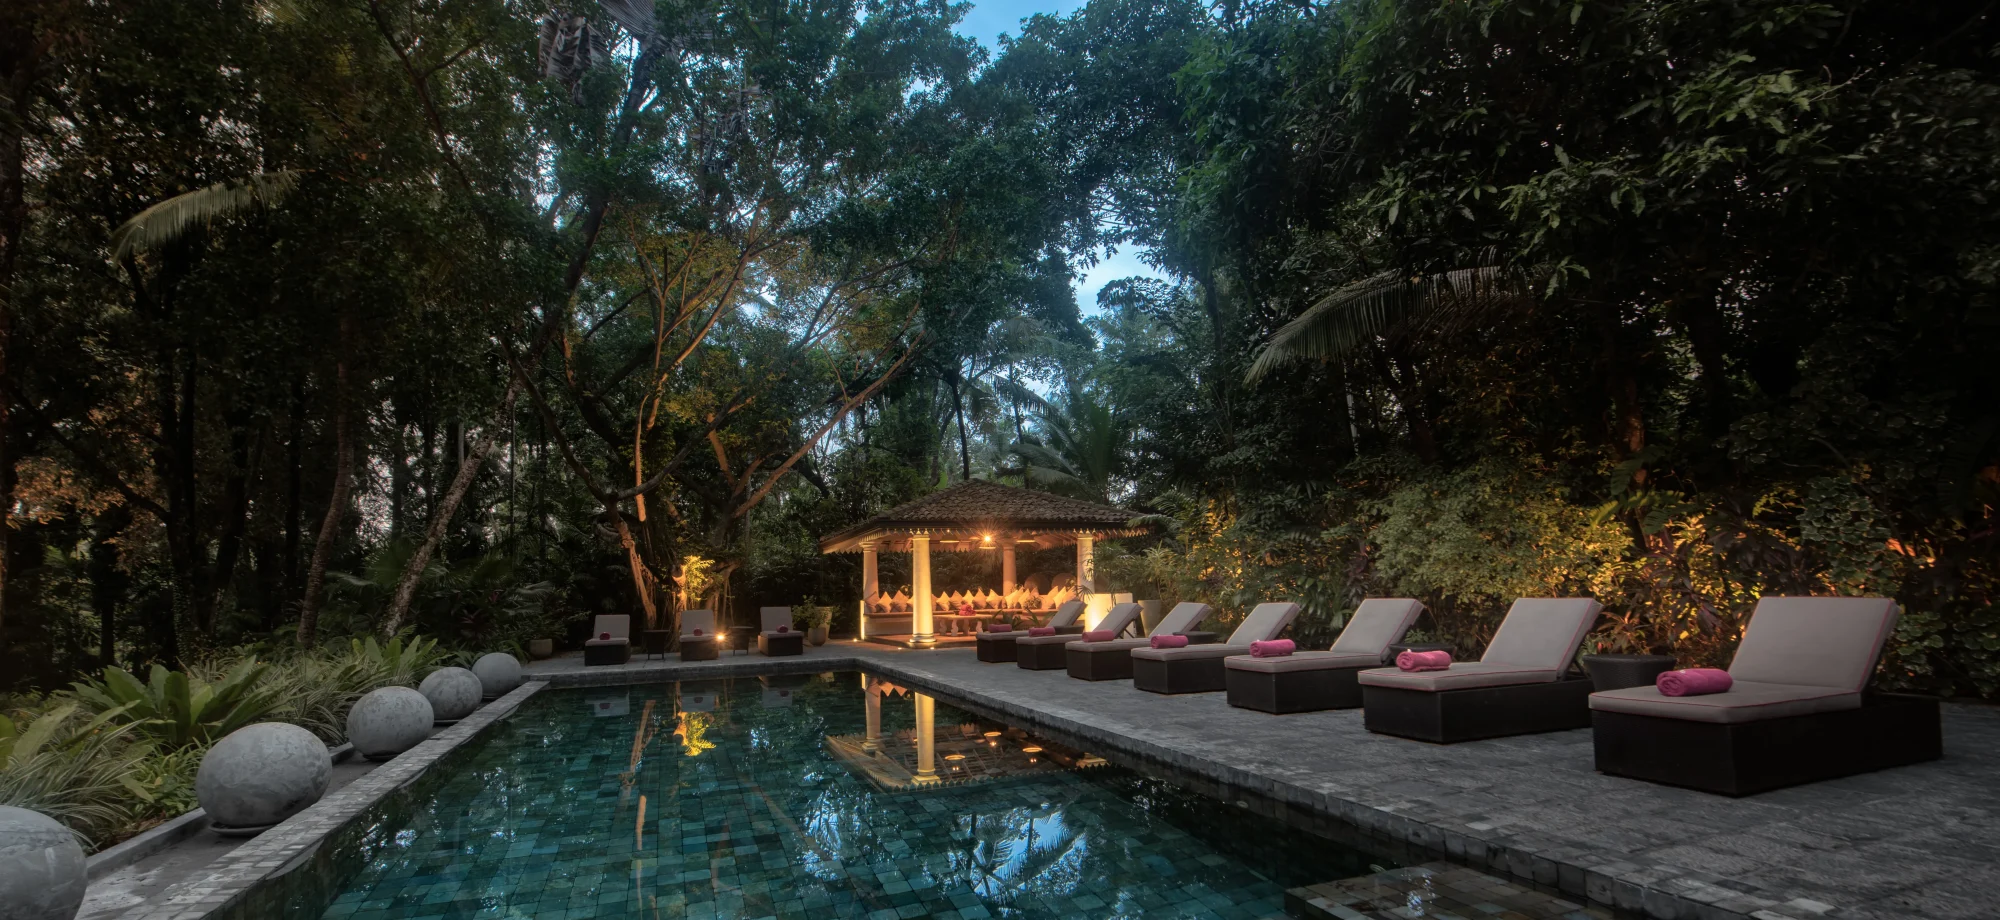 The outdoor pool is surrounded by a stone-paved sun deck equipped with comfy sun beds. The evening light shines through the thick foliage.